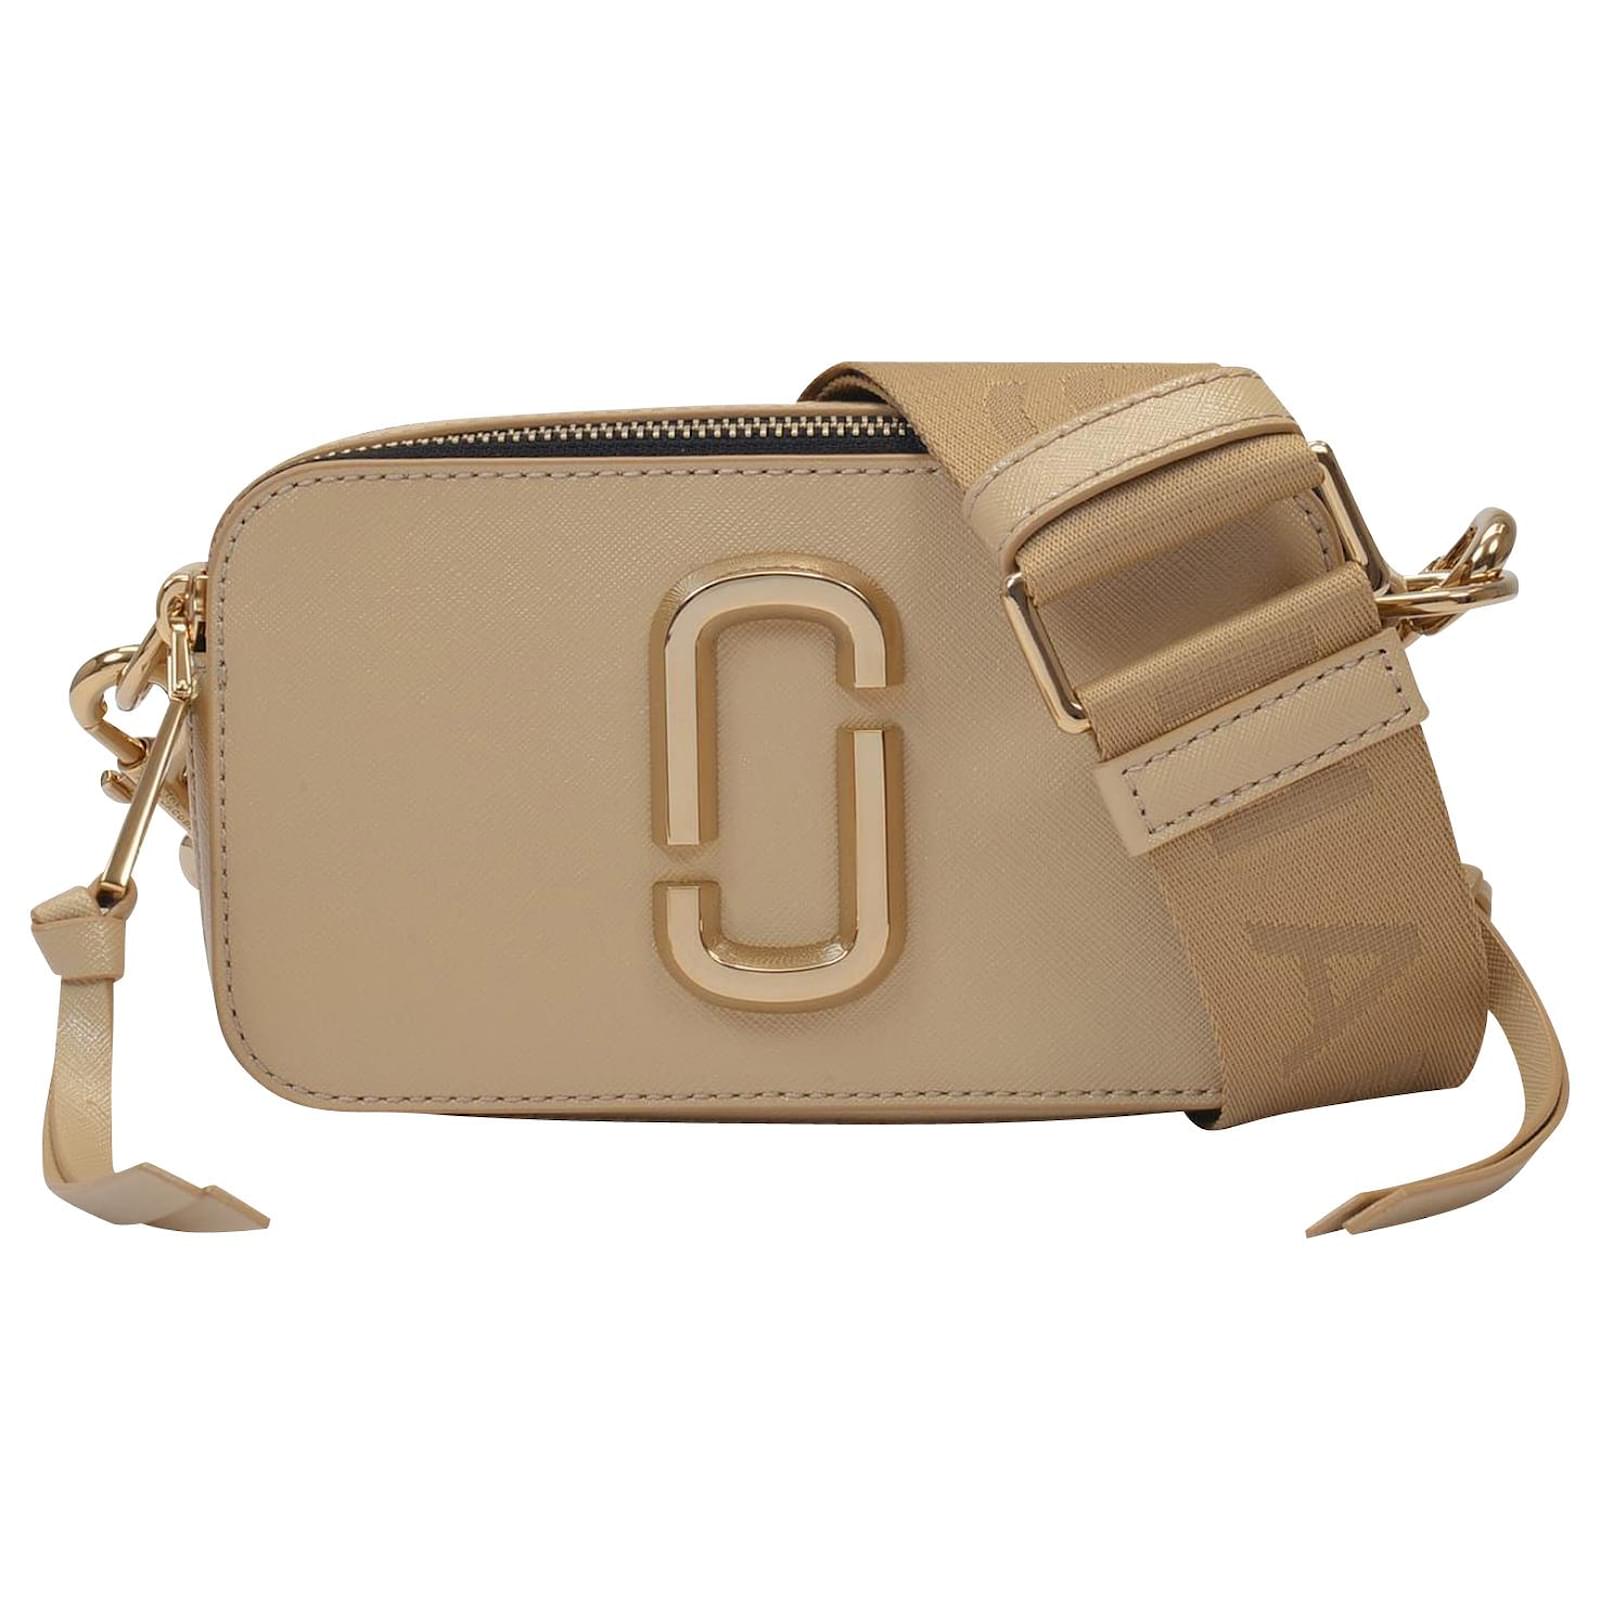 MARC JACOBS SNAPSHOT BAG IN KHAKI COLOR LEATHER